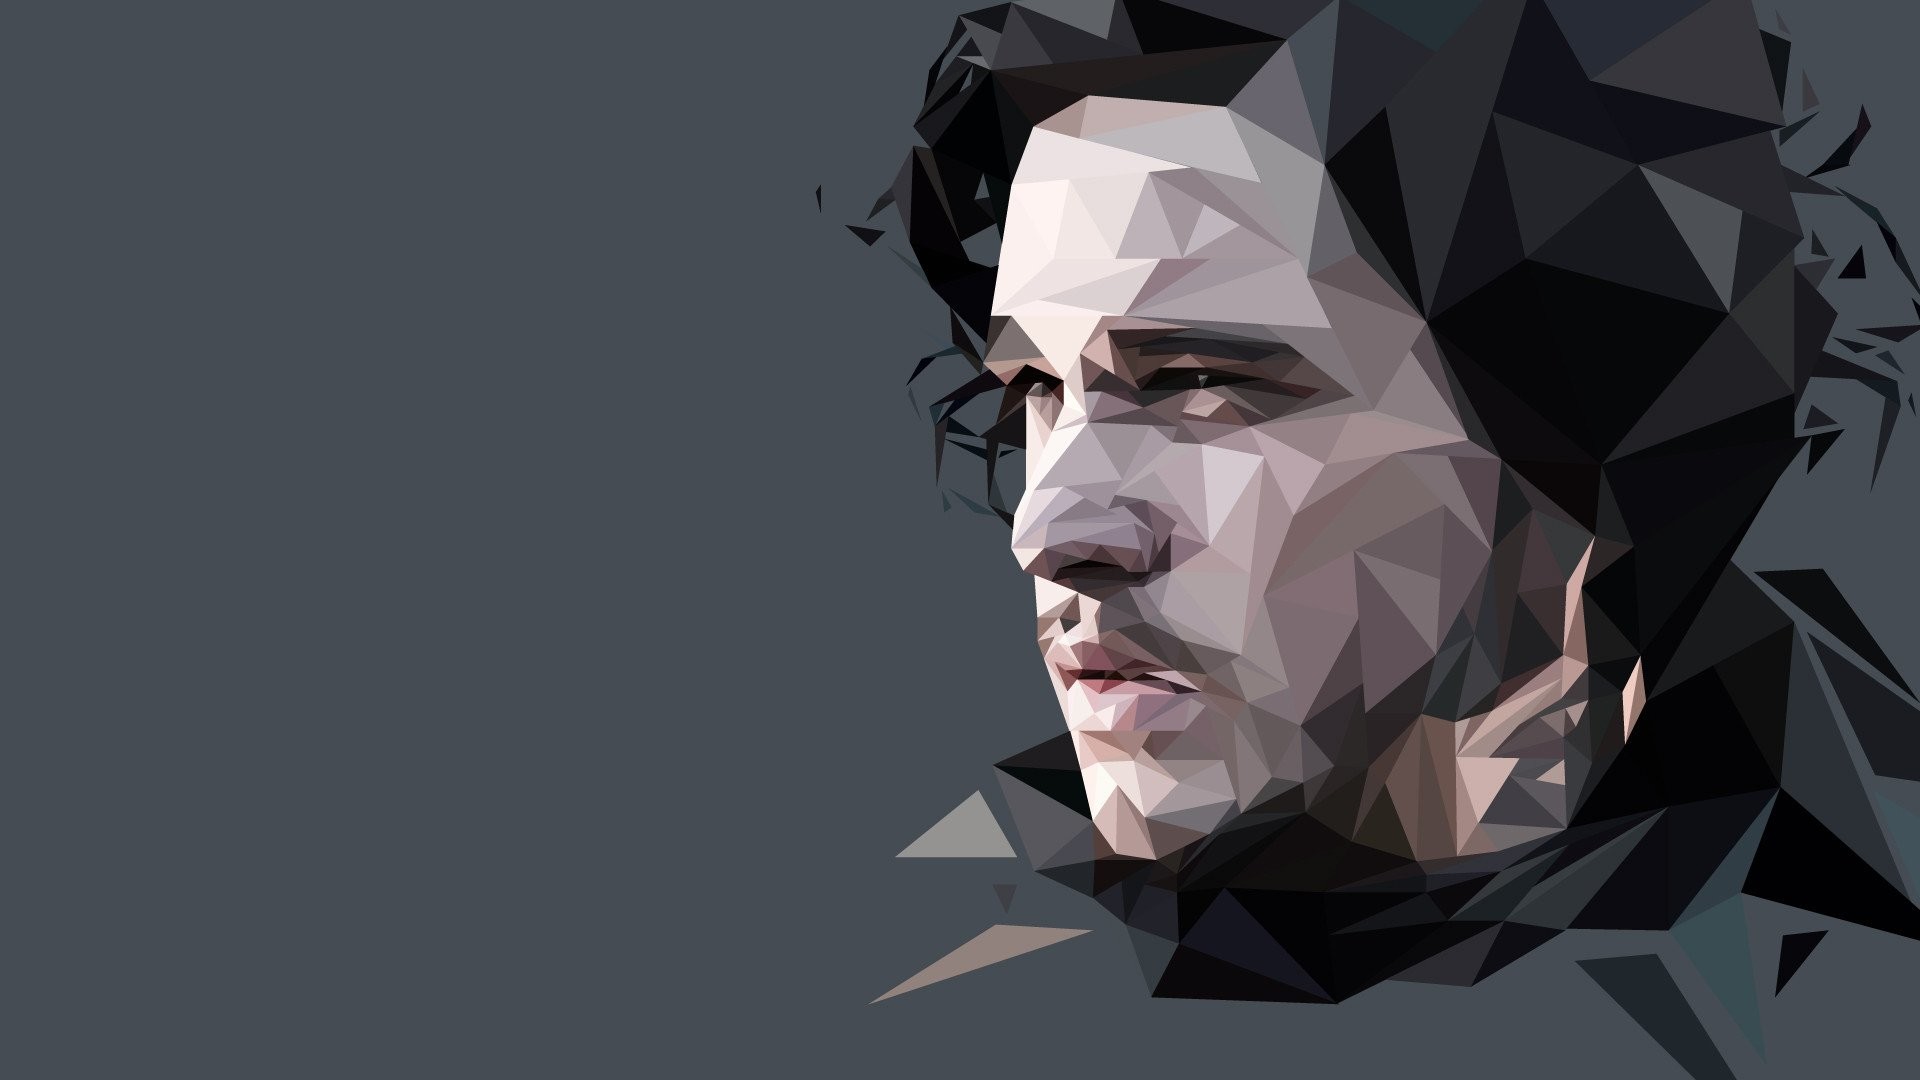 1920x1200, Hd Wallpaper - Game Of Thrones Abstract , HD Wallpaper & Backgrounds